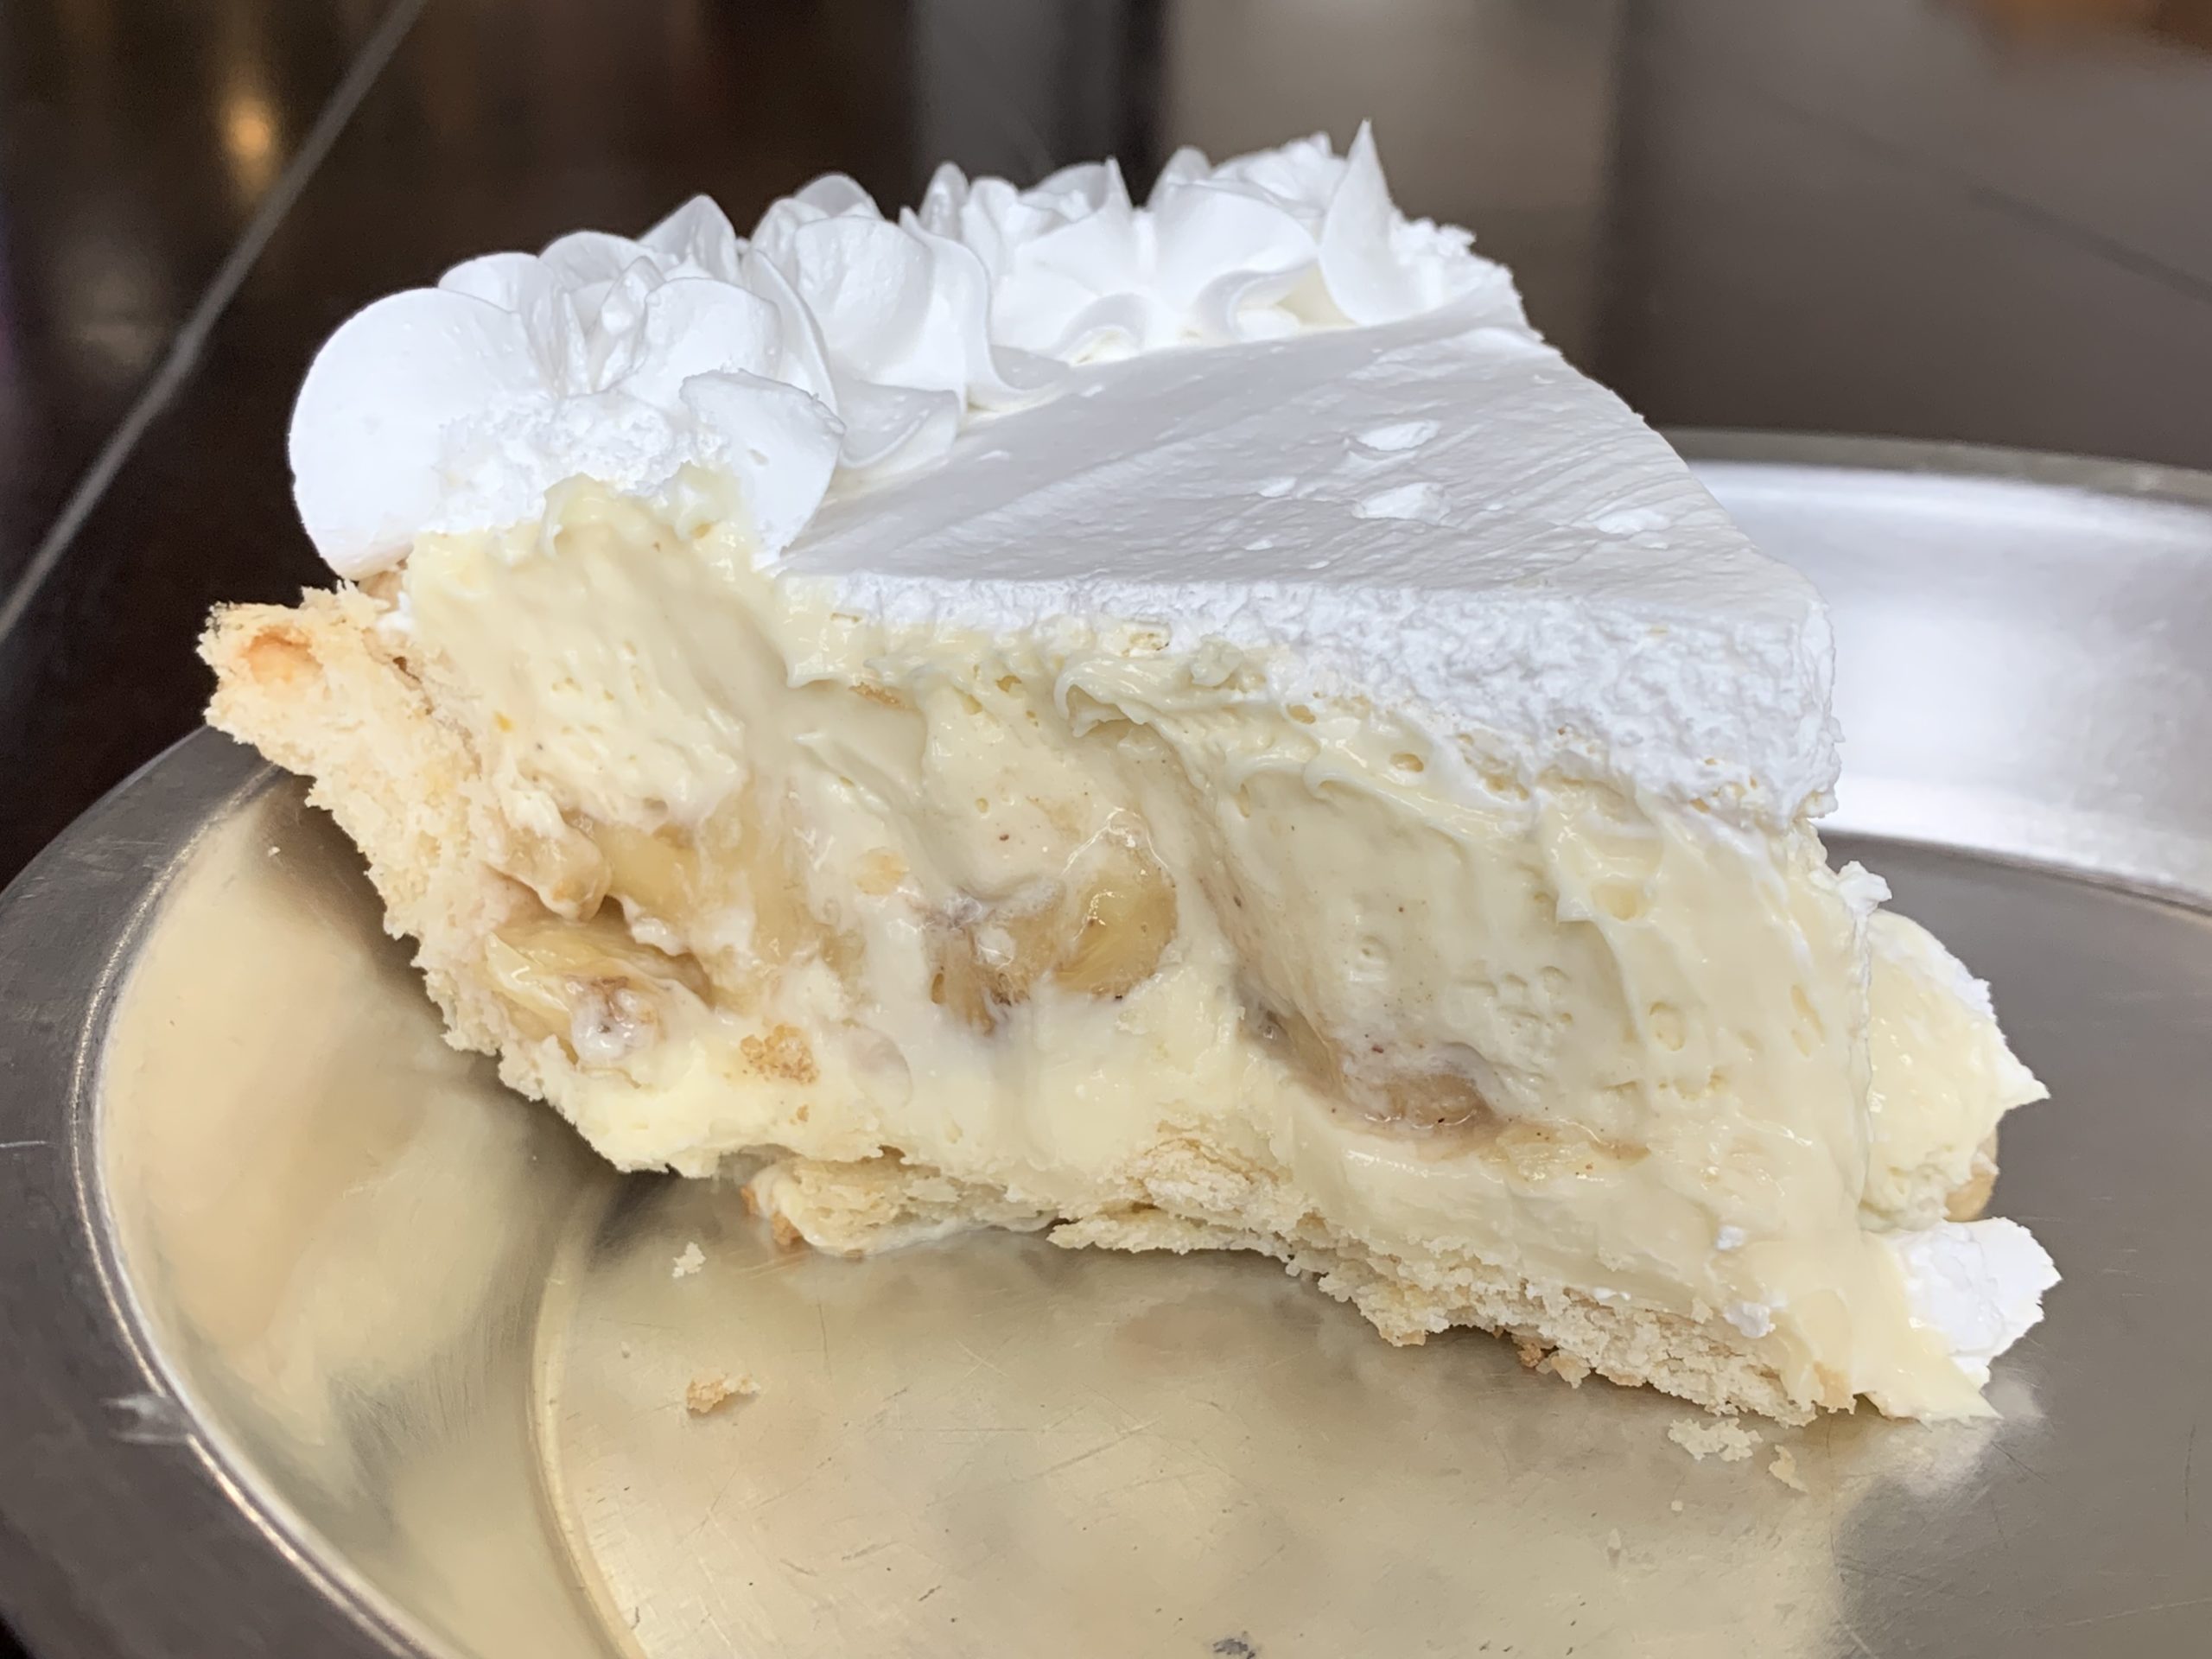 Cream pie slice is packed with bananas